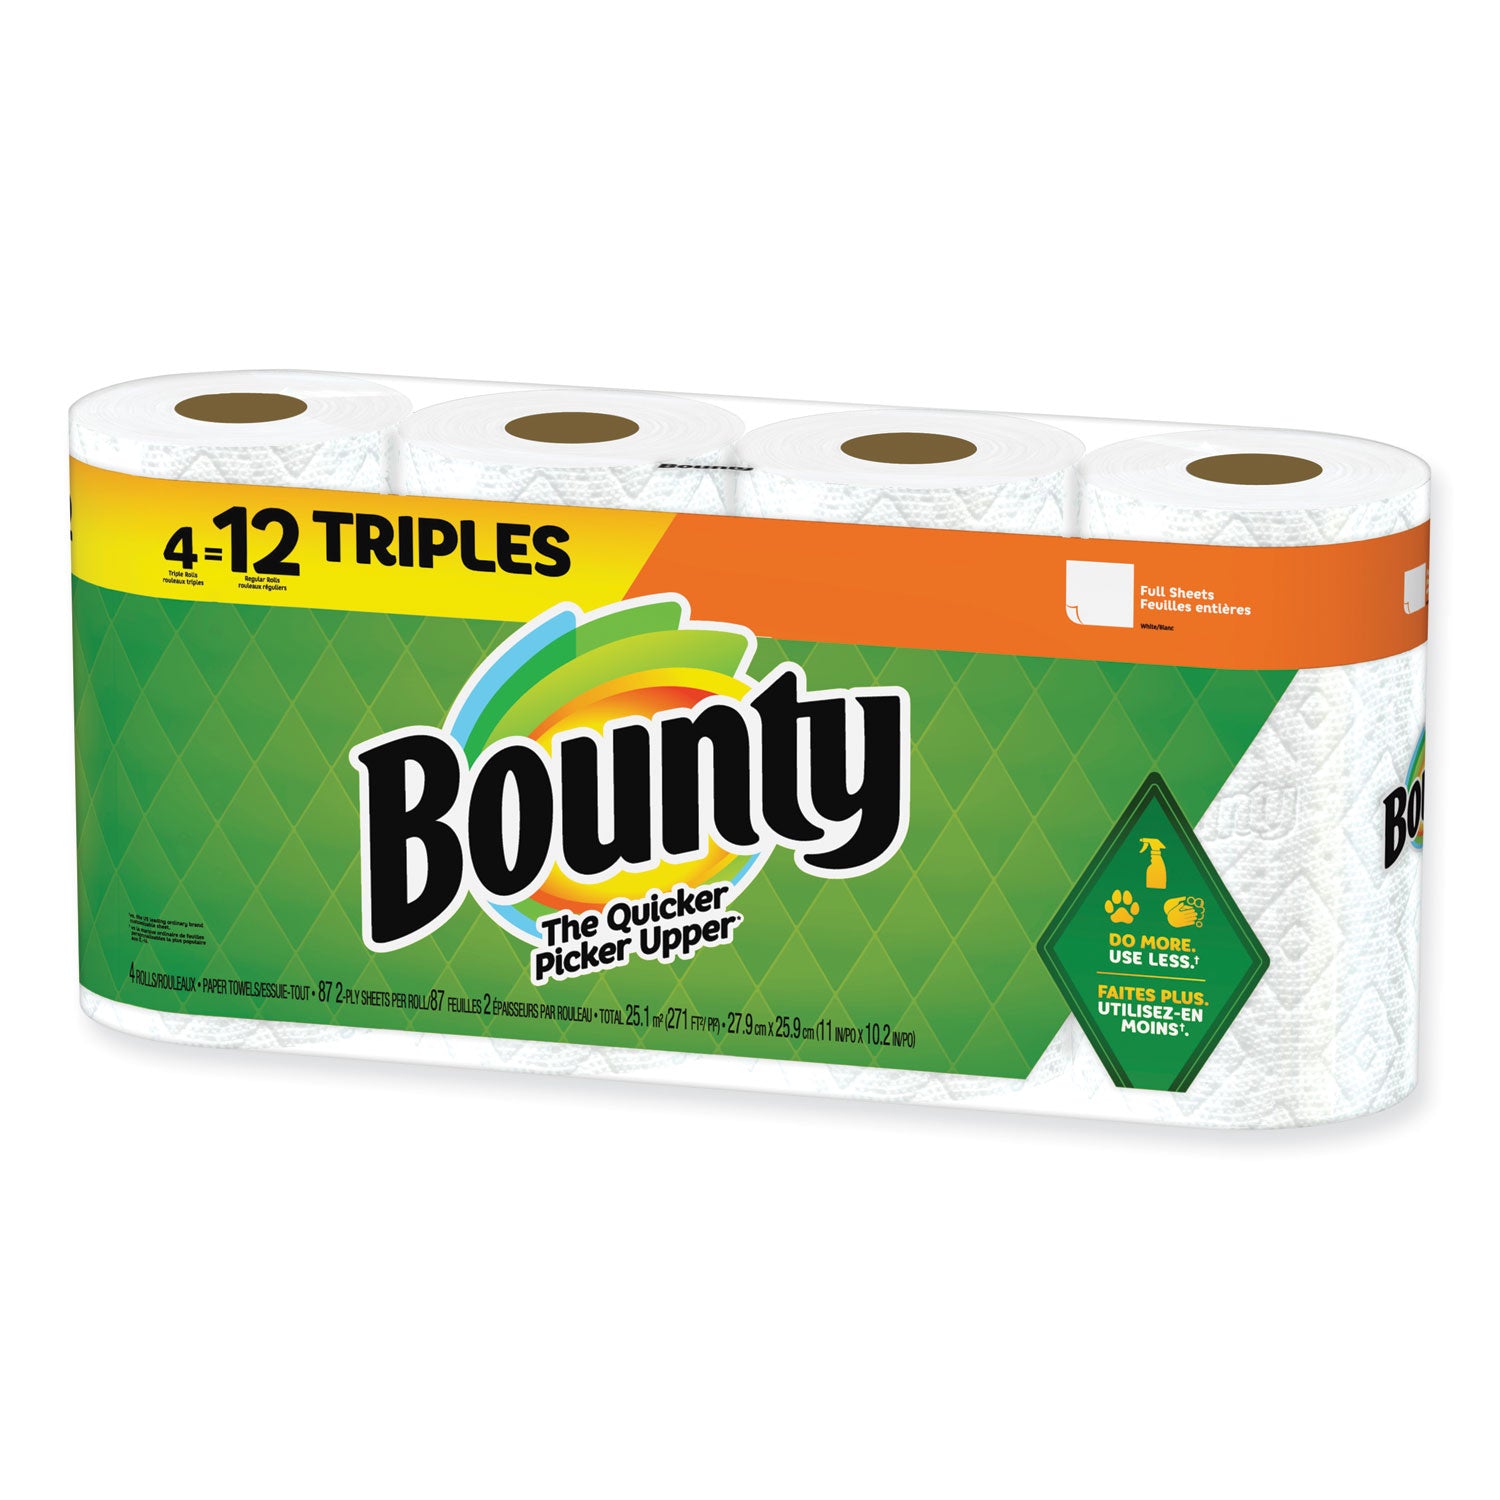 kitchen-roll-paper-towels-2-ply-white-105-x-11-87-sheets-roll-4-triple-rolls-pack-6-packs-carton_pgc06109 - 1